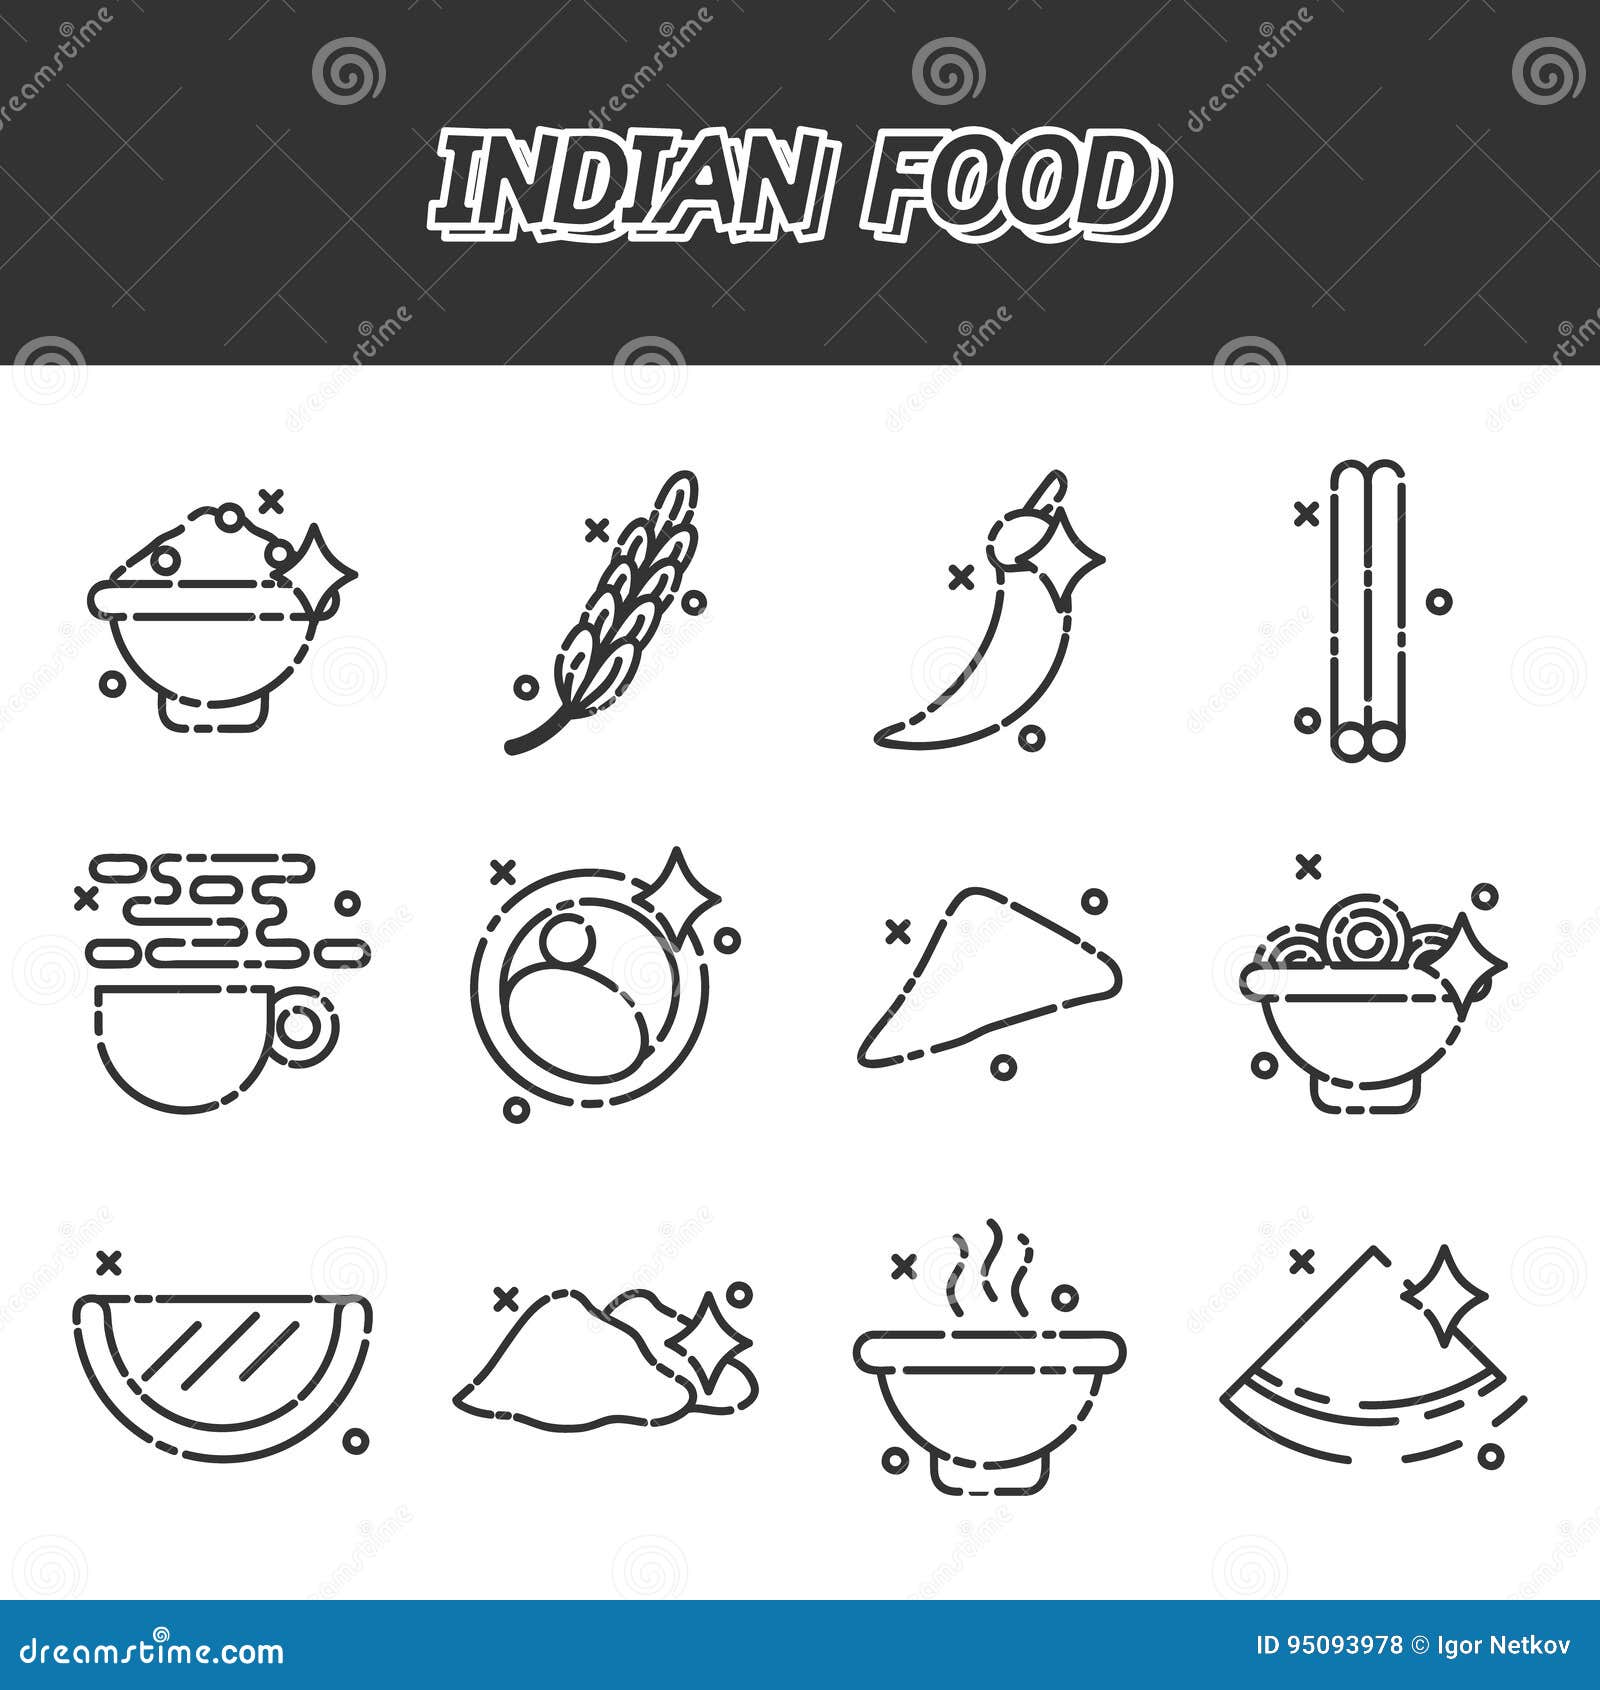 Indian Food Cartoon Concept Icons Stock Vector - Illustration of culture,  indian: 95093978